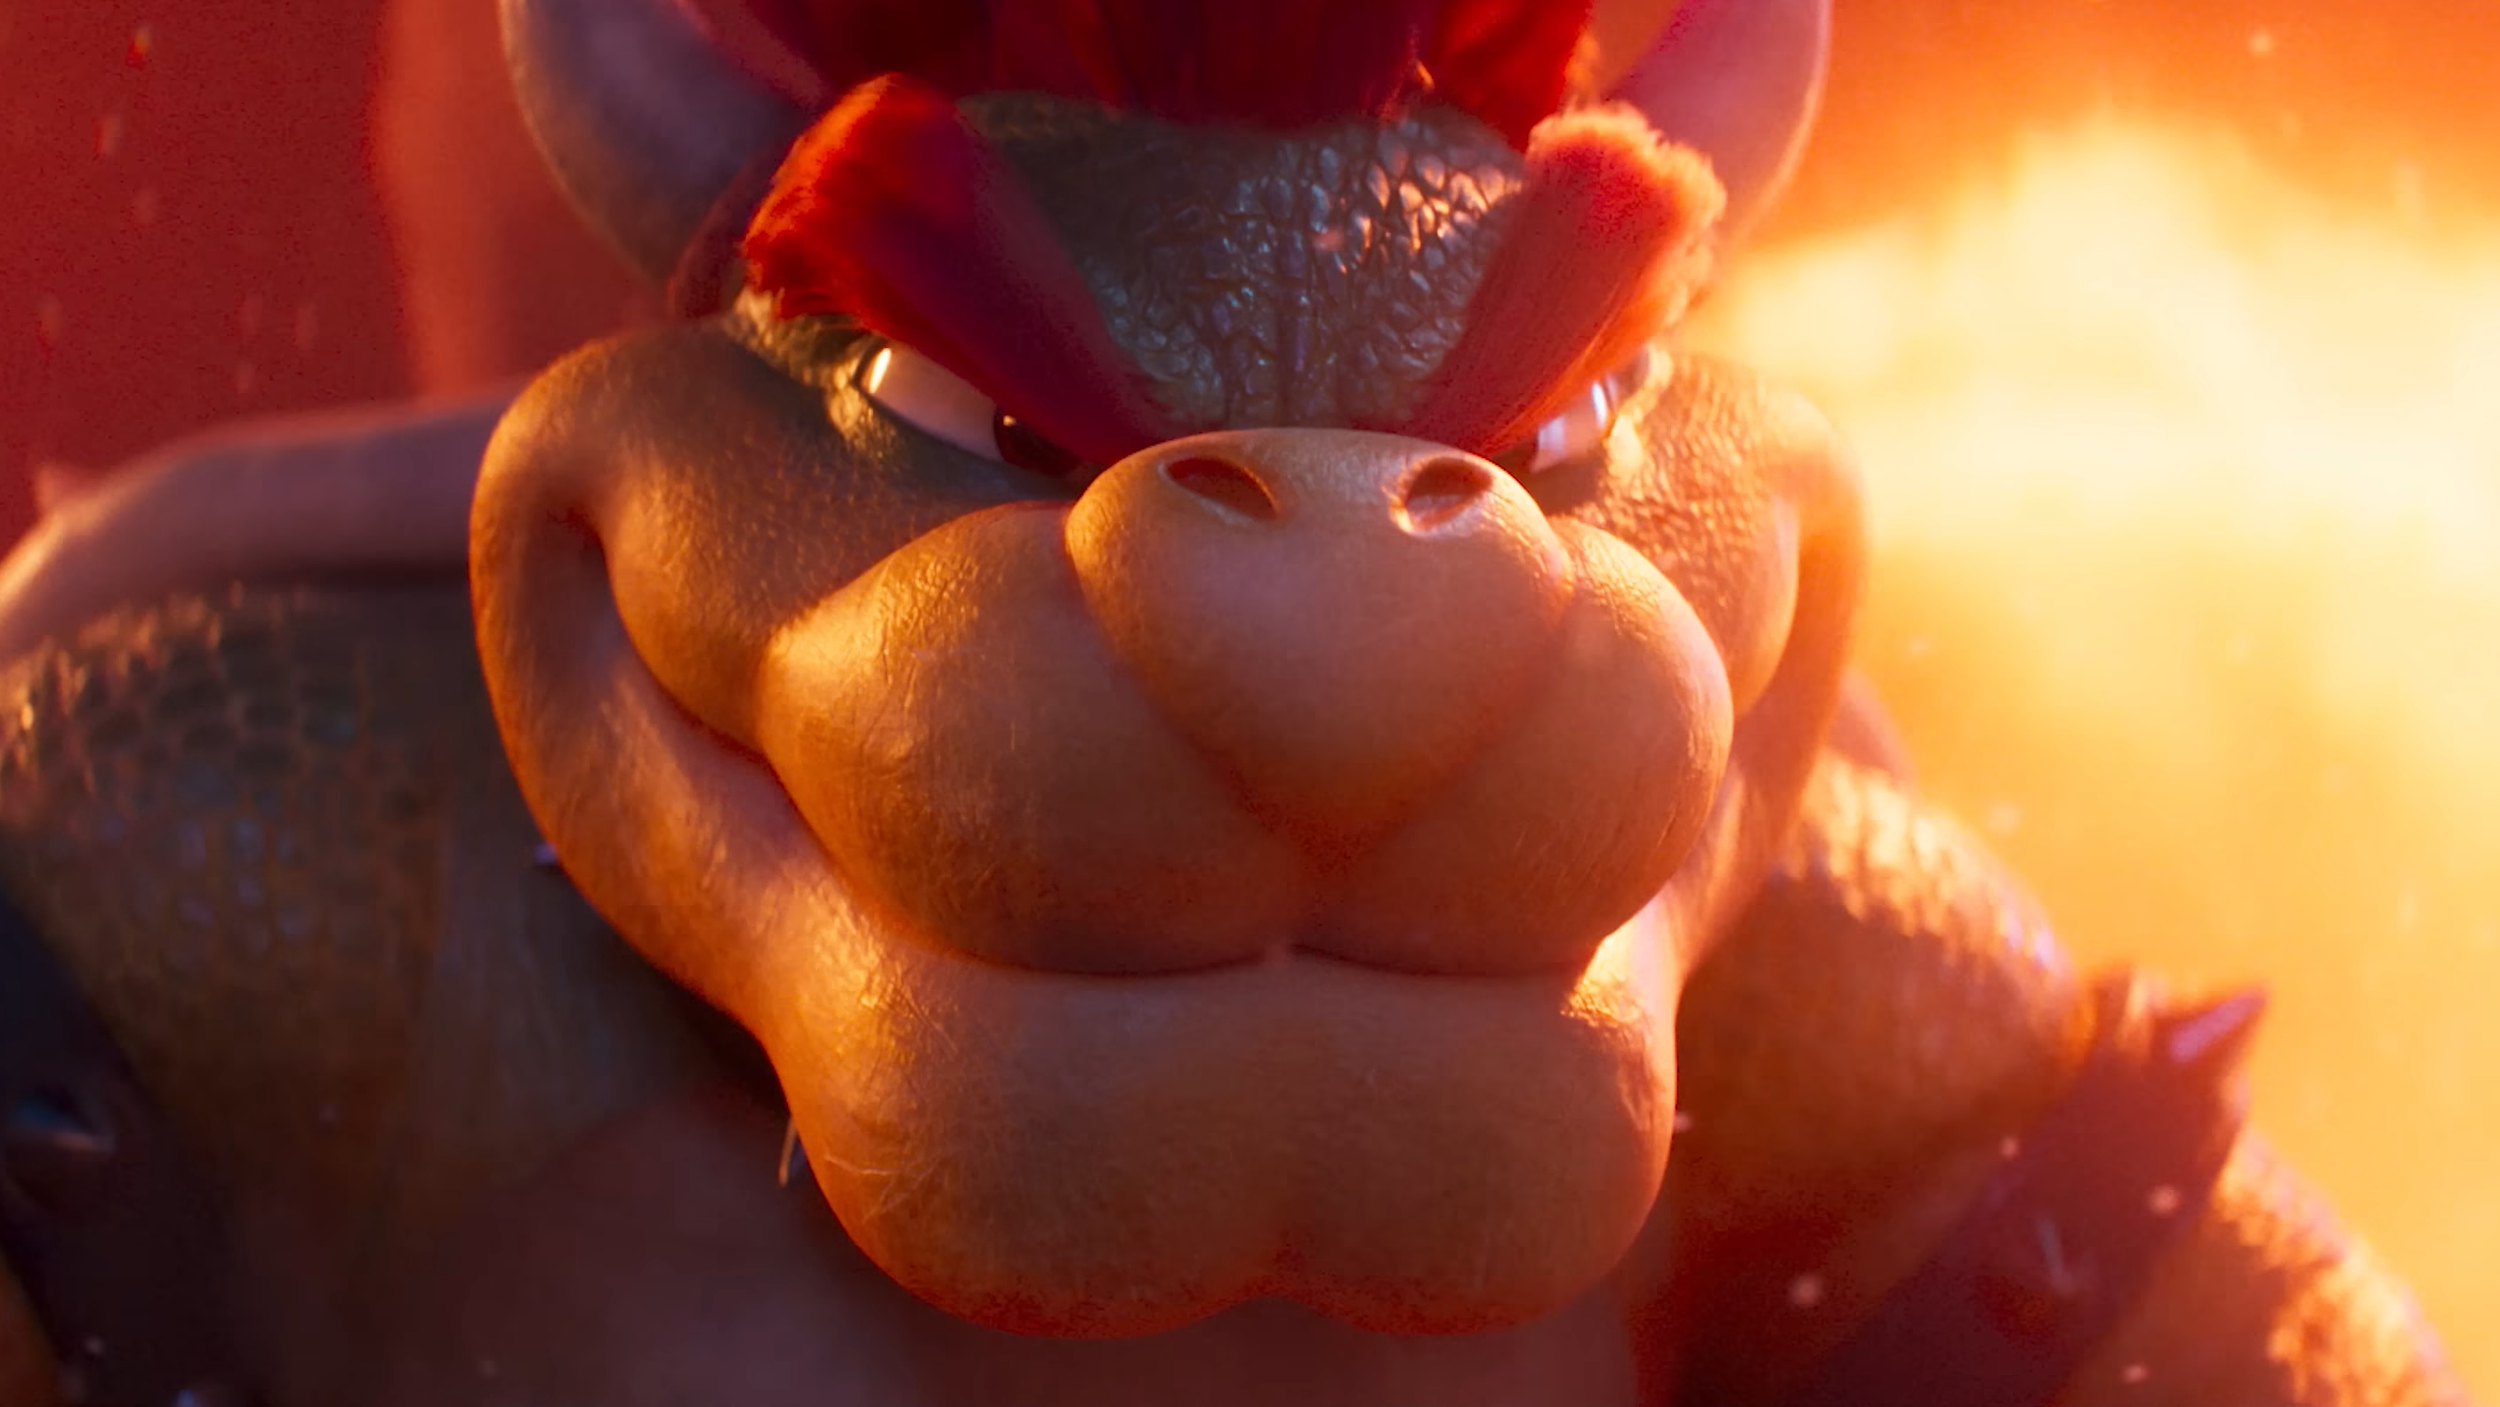 Super Mario Bros Movie Shows a Terrifying Bowser and Colorful World